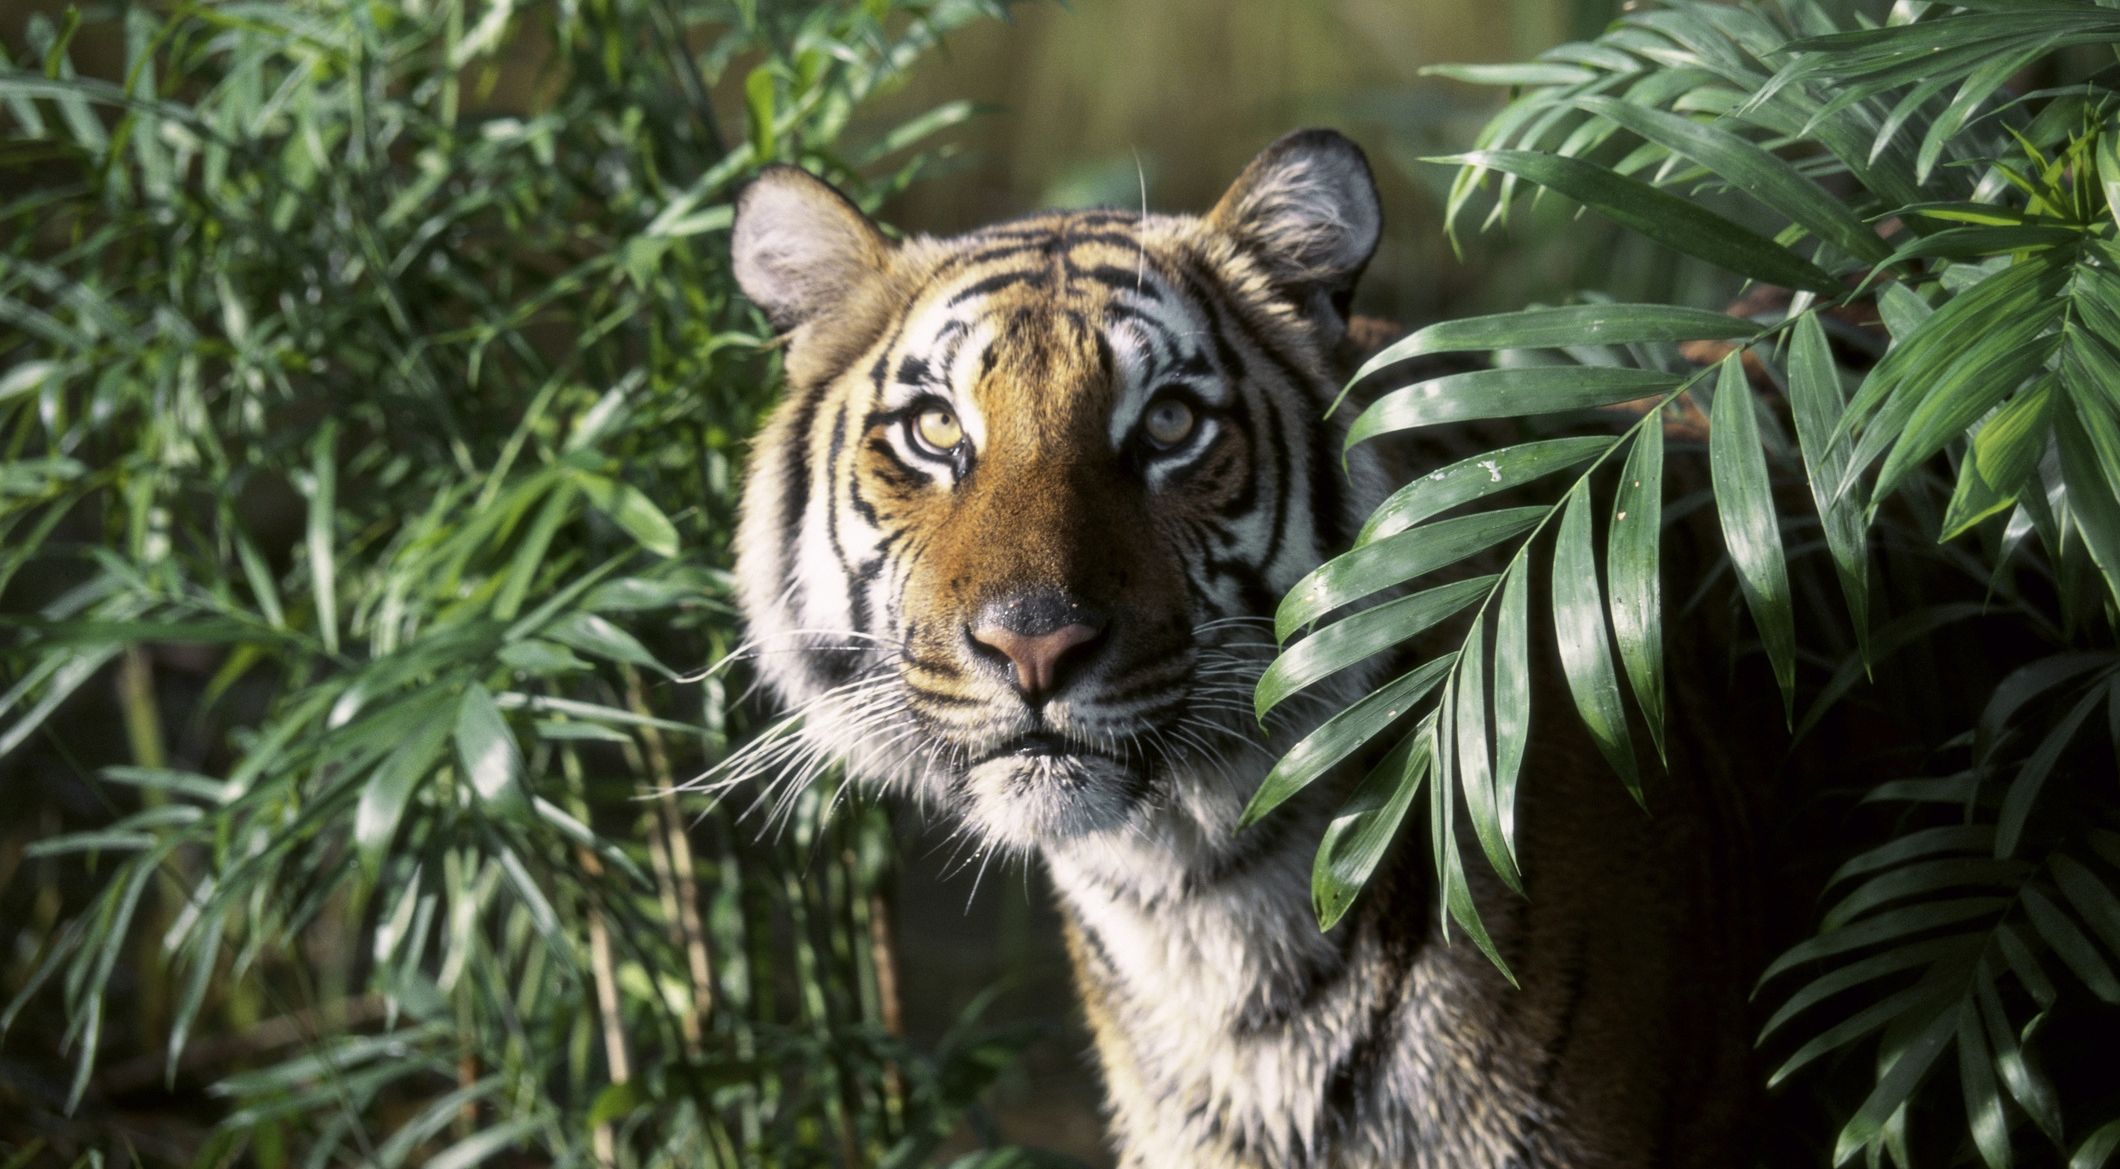 Cubs offer hope for Indochinese tigers in Thap Lan National Park, Thailand, News